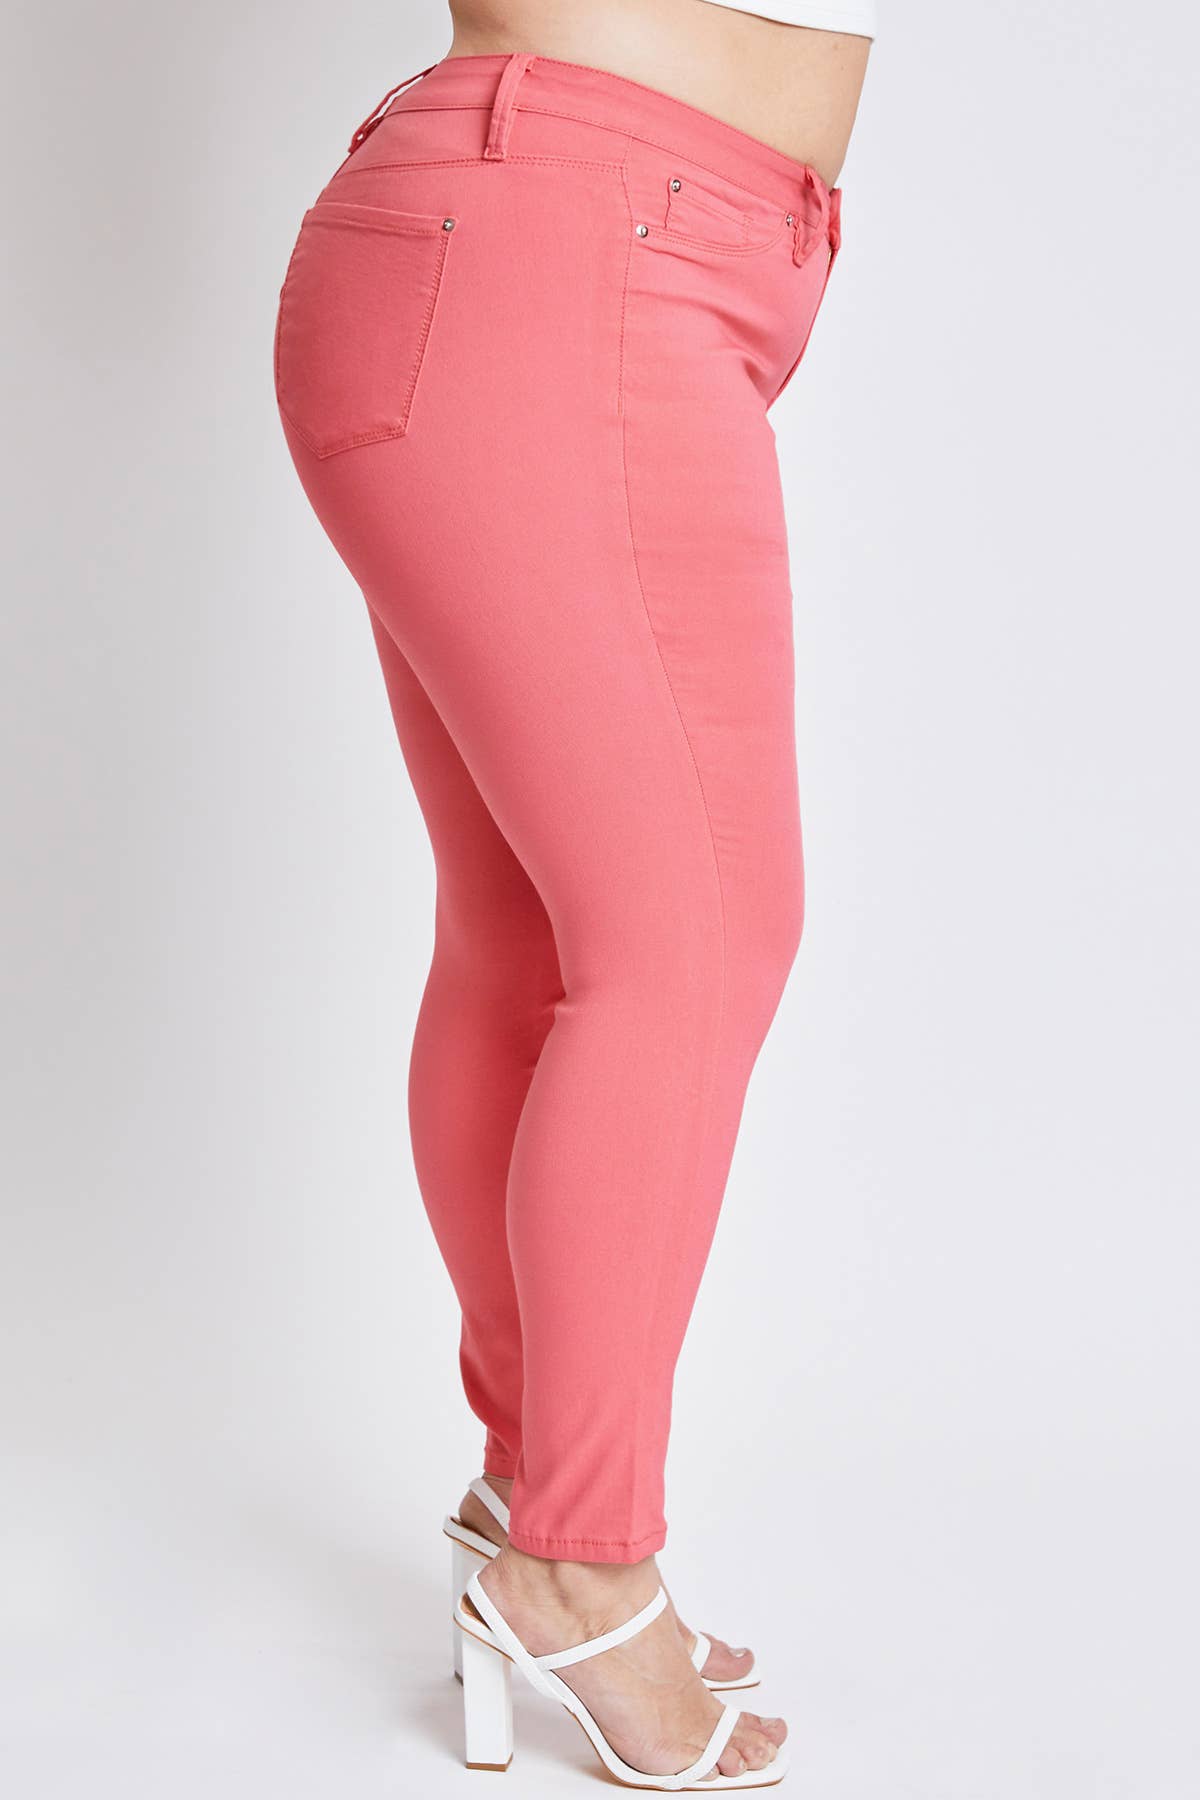 Plus Size Hyperstretch Skinny Jean: Shell Pink